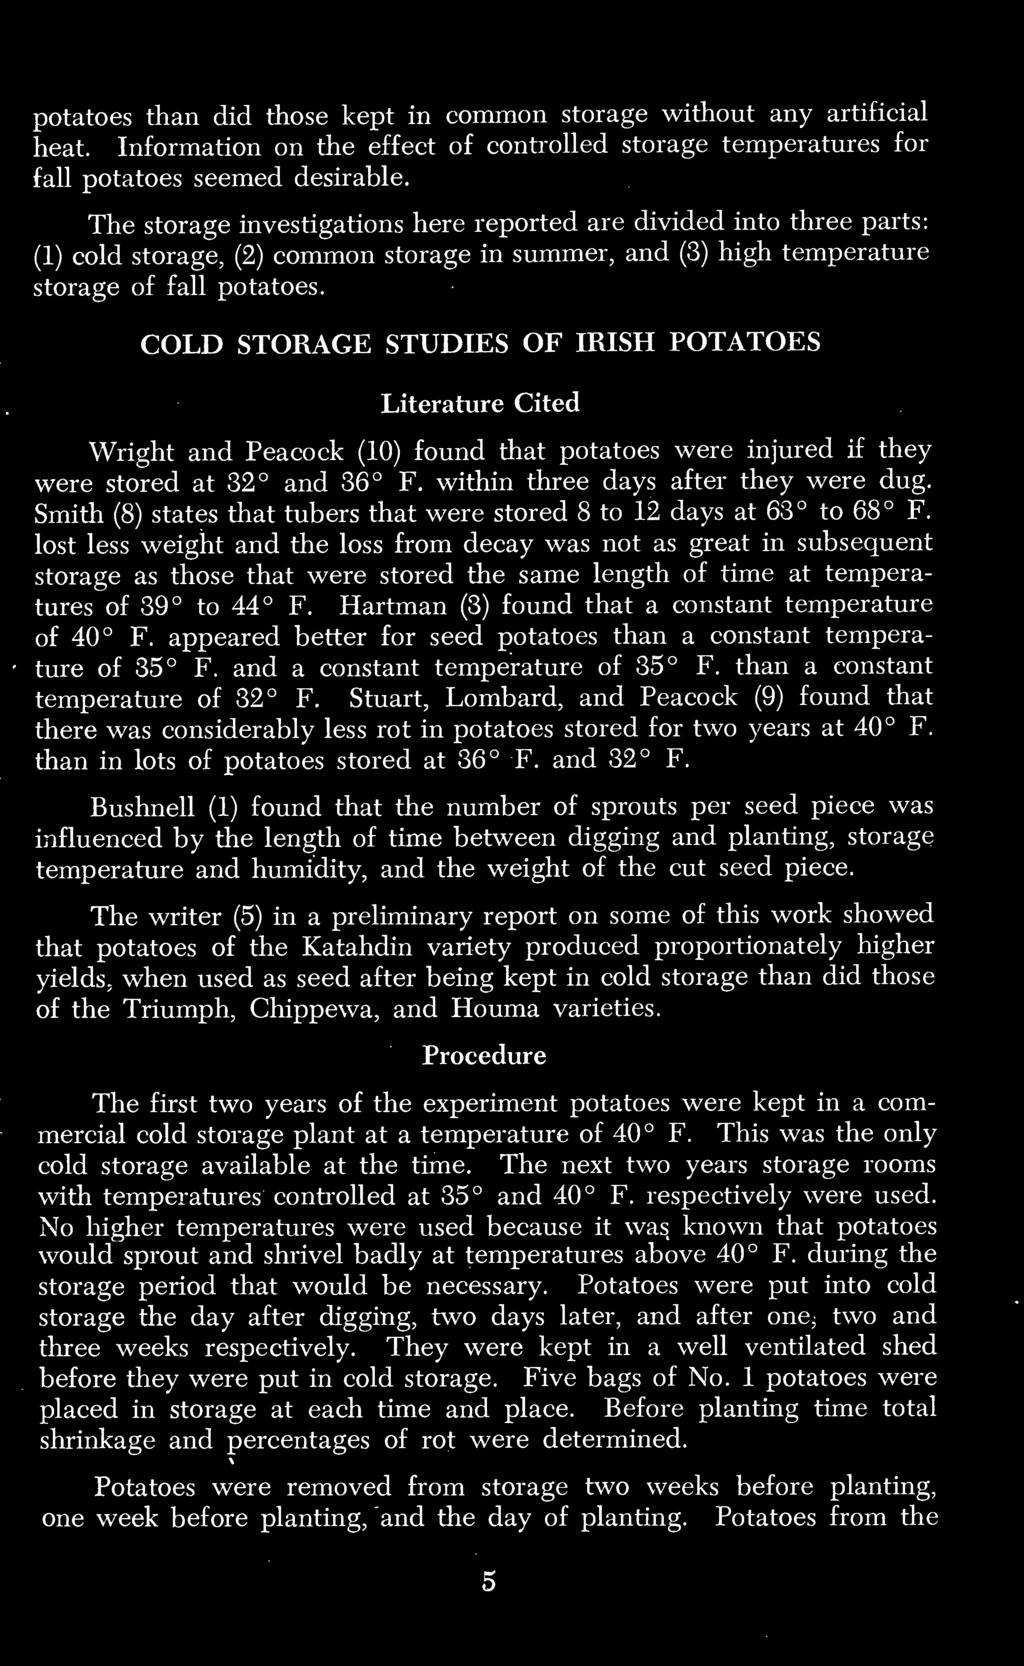 COLD STORAGE STUDIES OF IRISH POTATOES Literature Cited Wright and Peacock (10) found that potatoes were injured if they were stored at 32 and 36 F. within three days after they were dug.